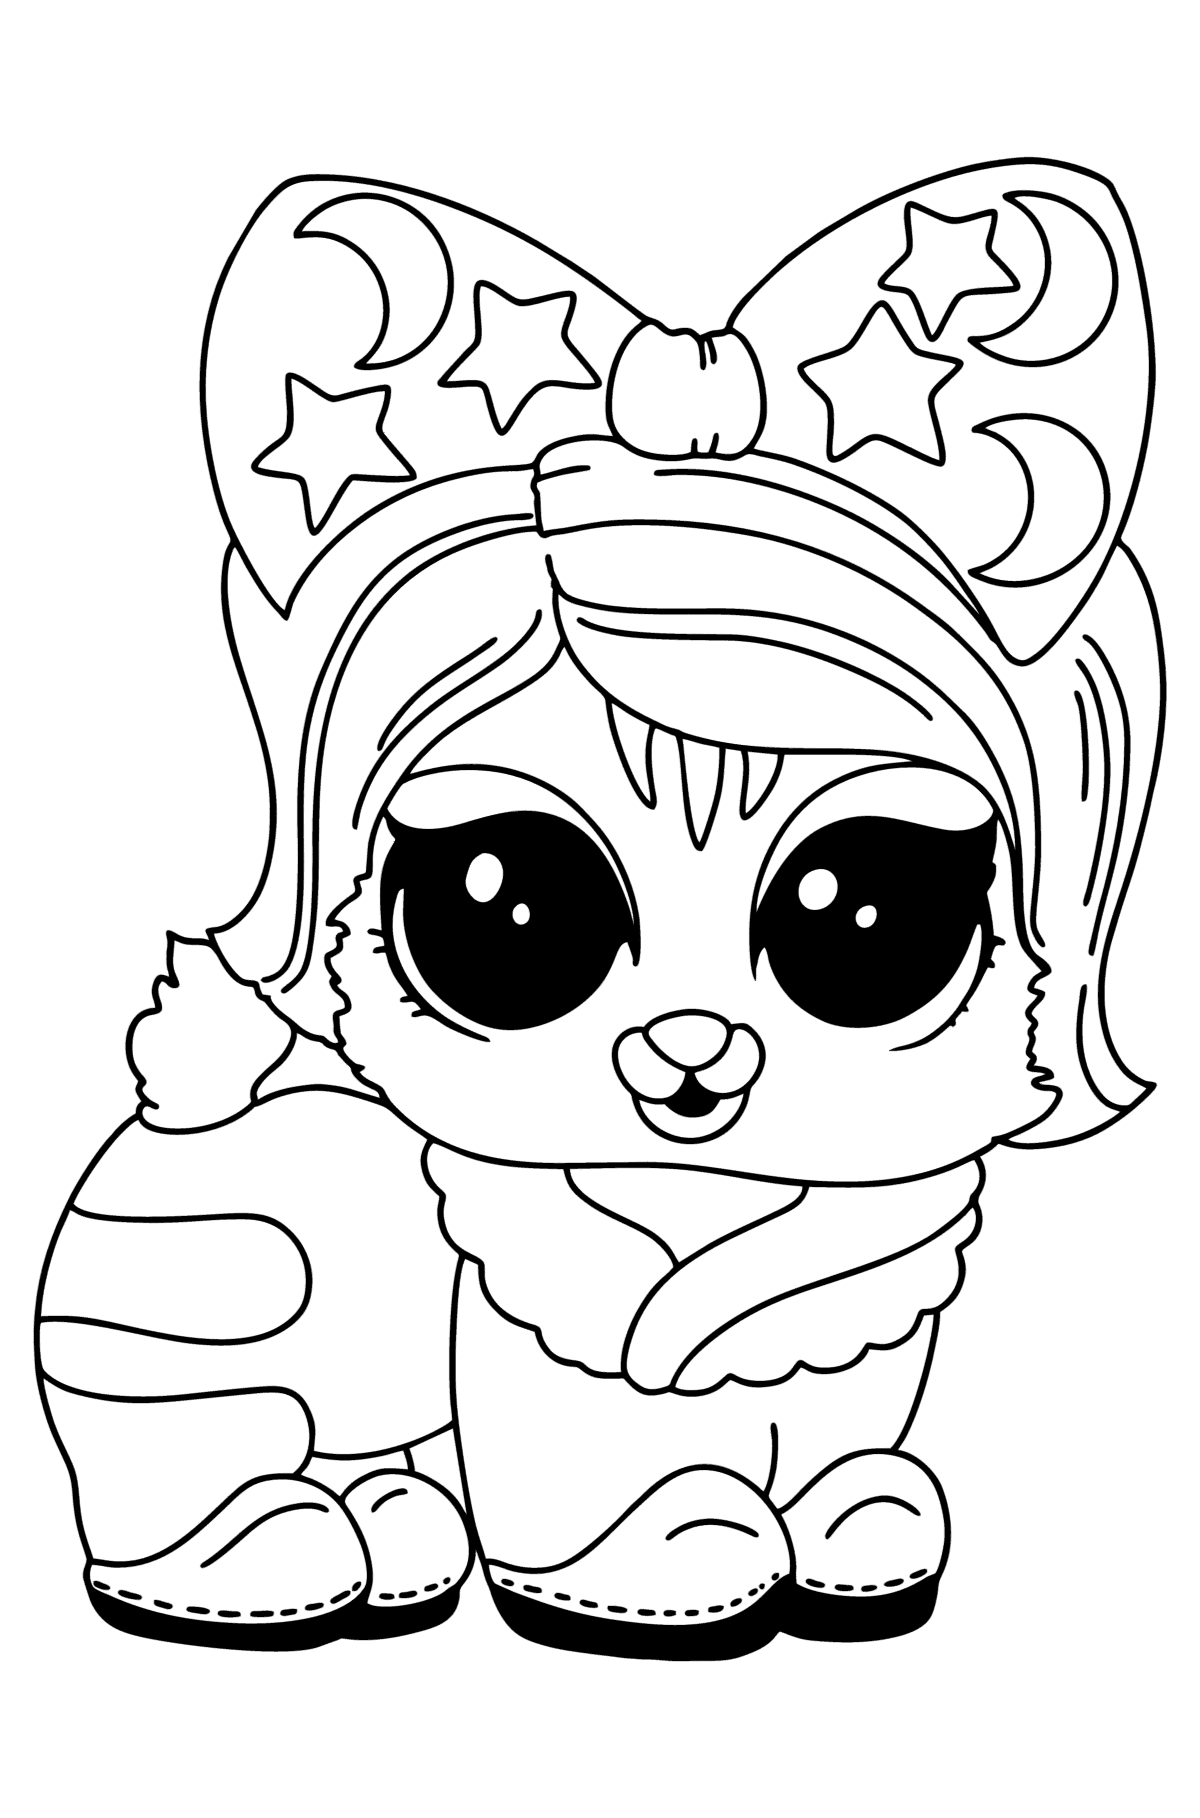 Coloring page LOL Pet Kitty - Coloring Pages for Kids